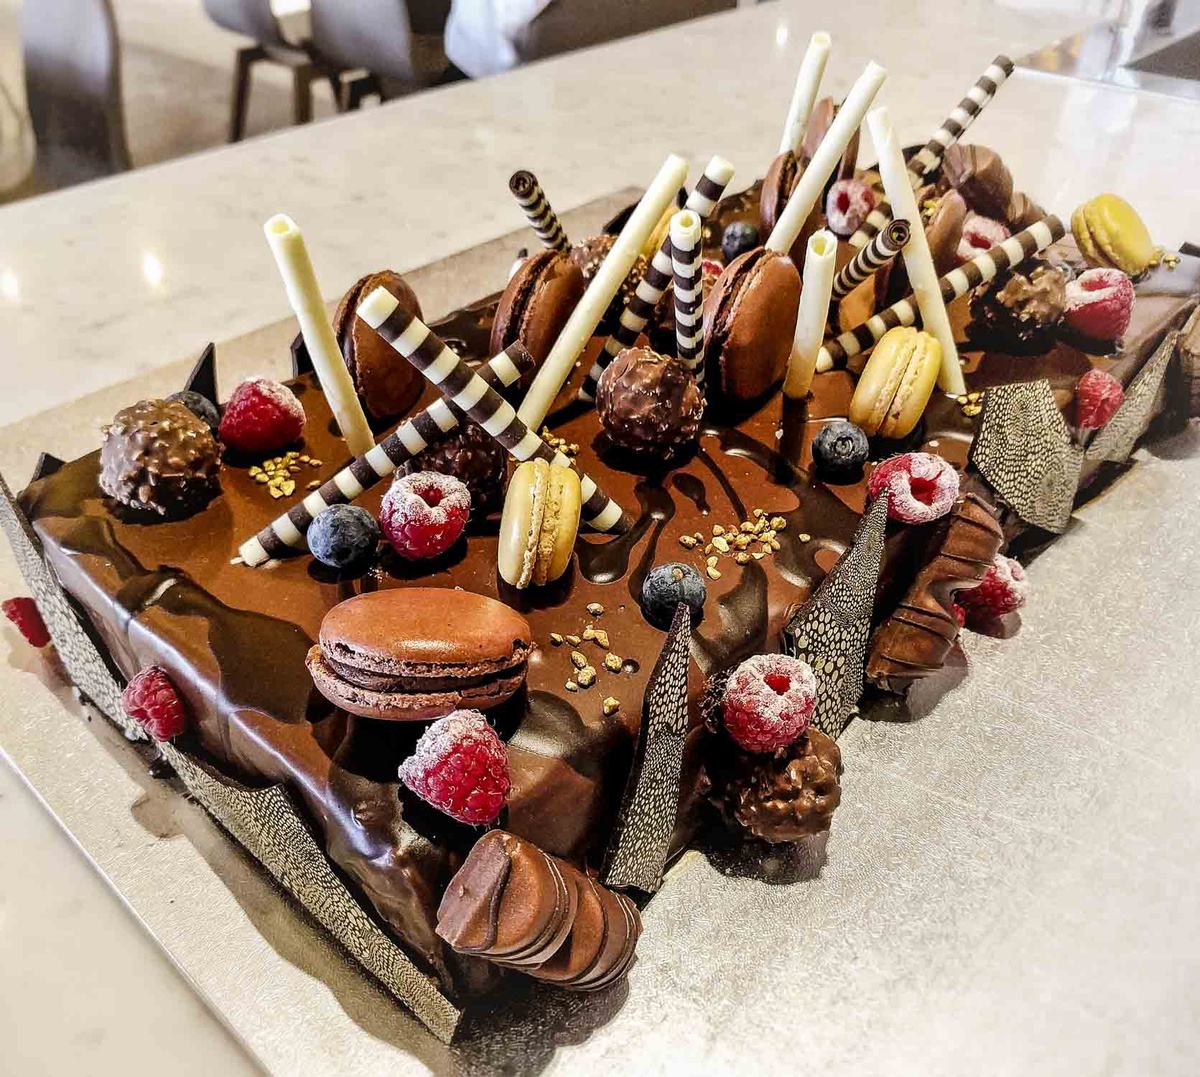 From Classic to Creative: Birthday Cake Ideas for All Perth Taste Buds